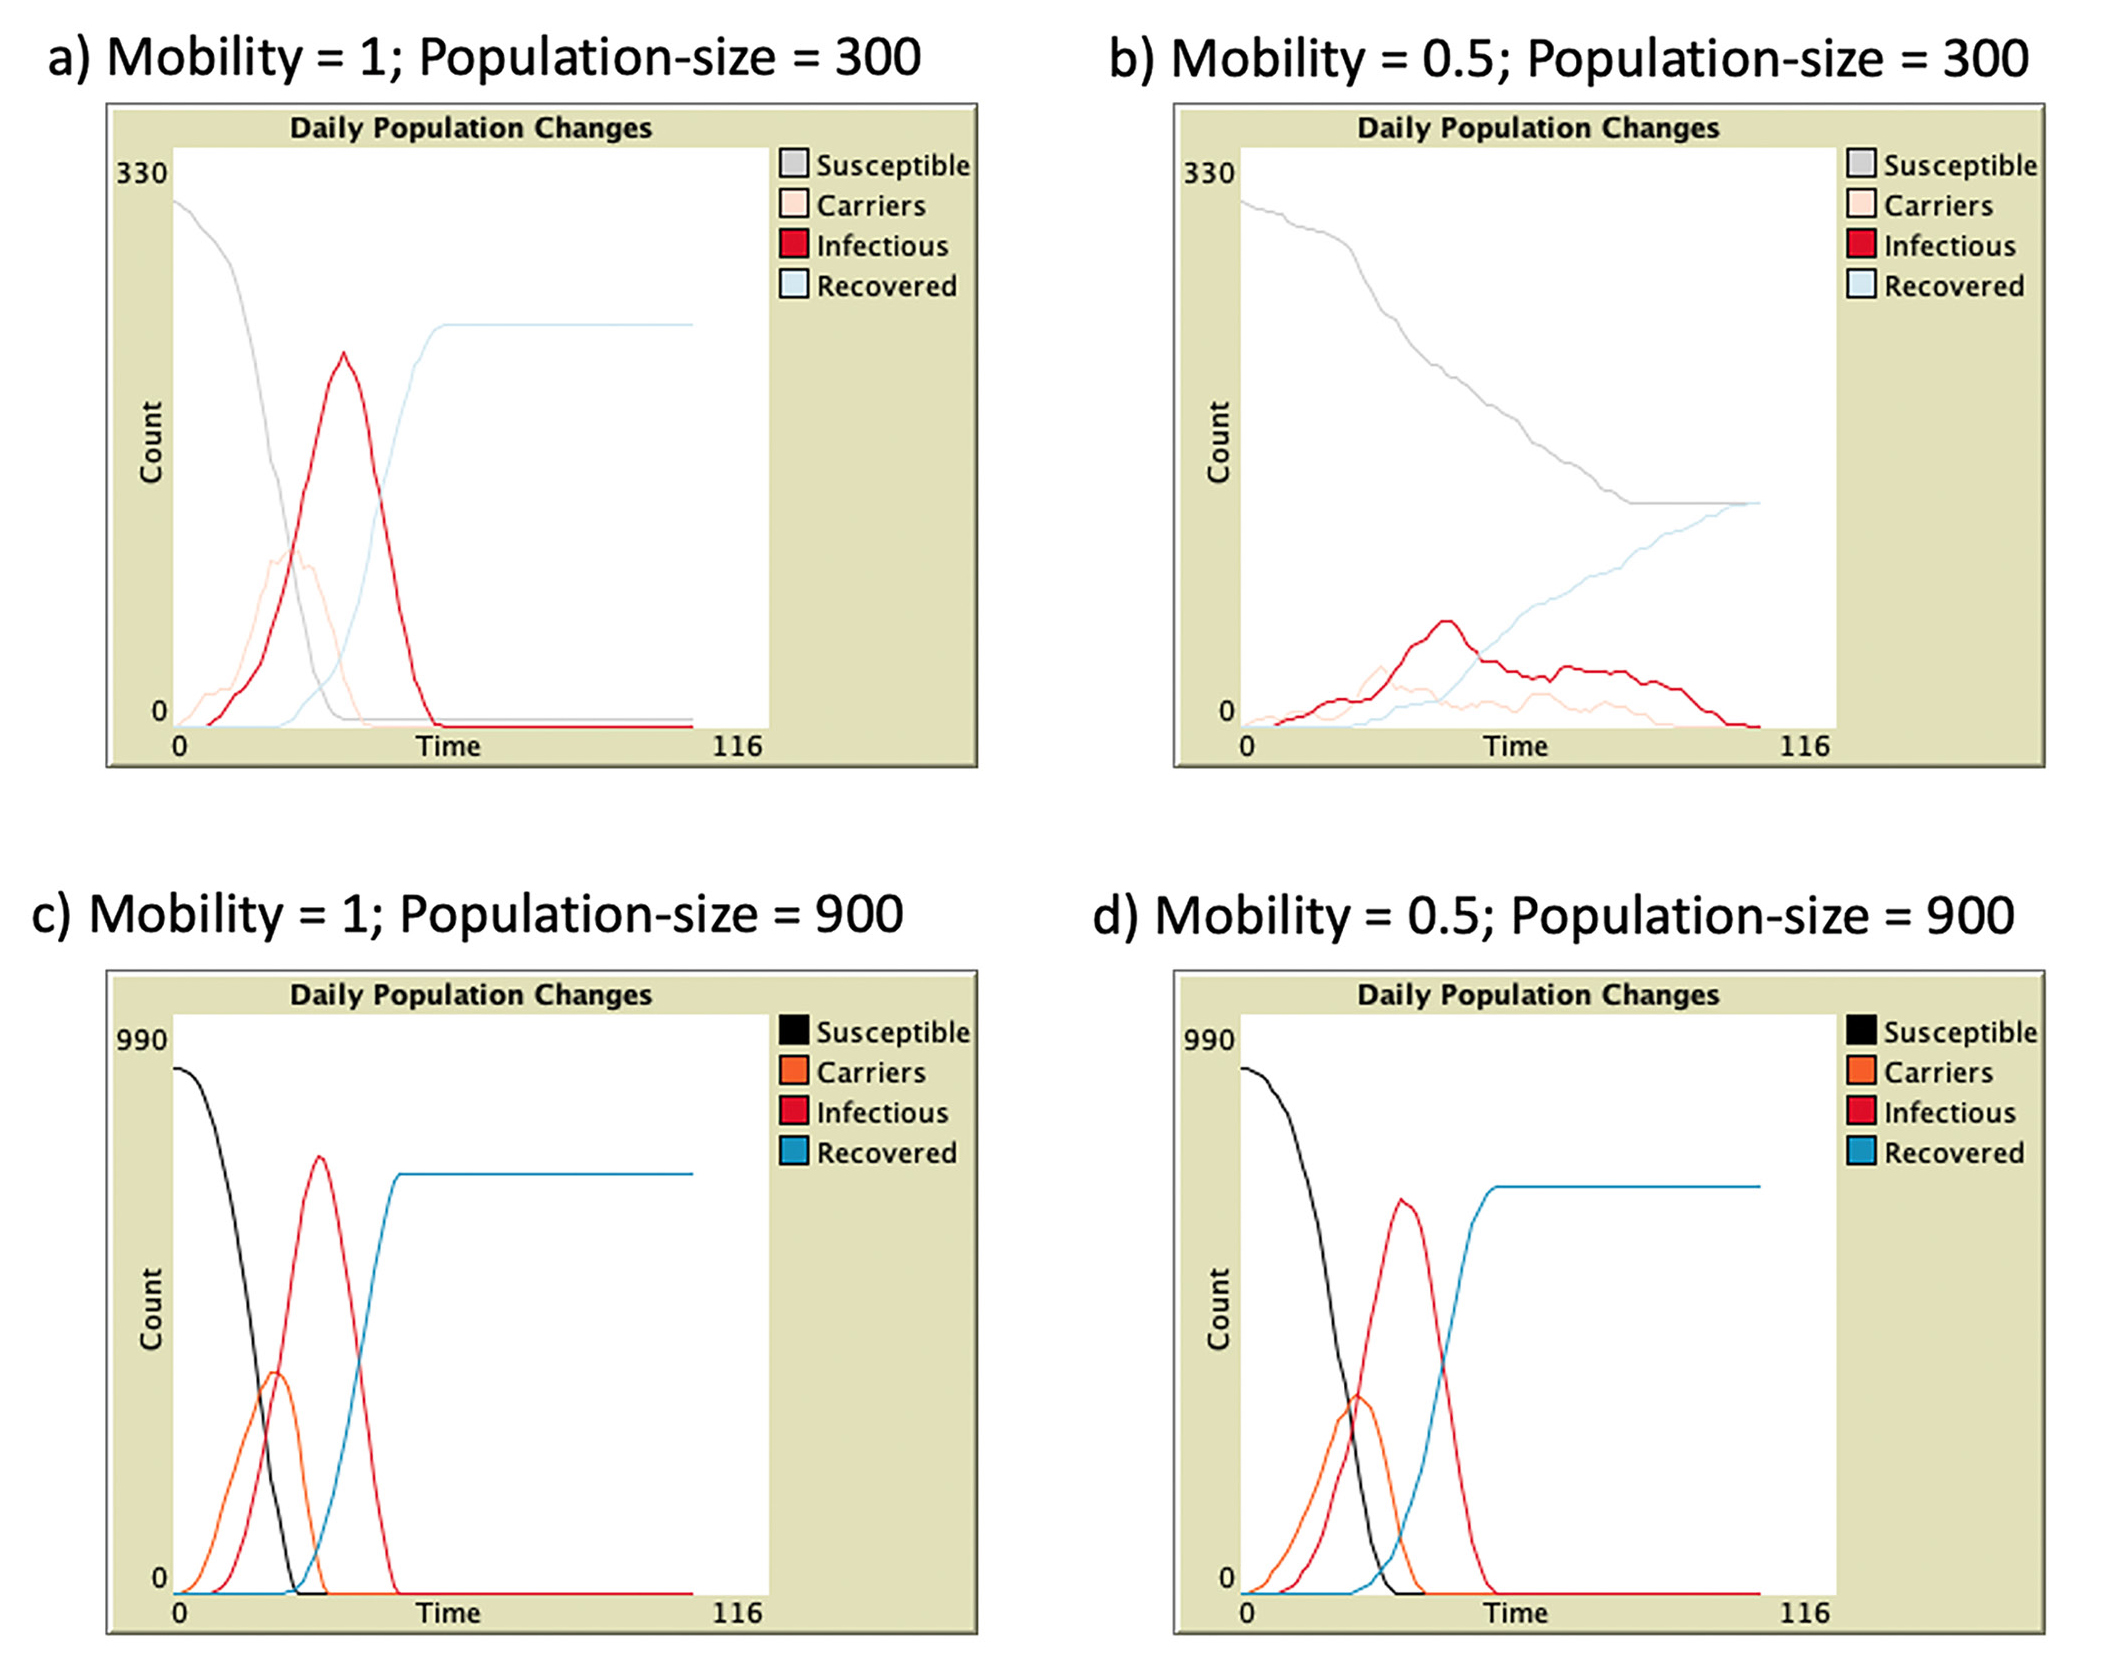 Computer simulation shows the levels of mobility influence the infectious curve more effectively in a less dense population than in a dense one.